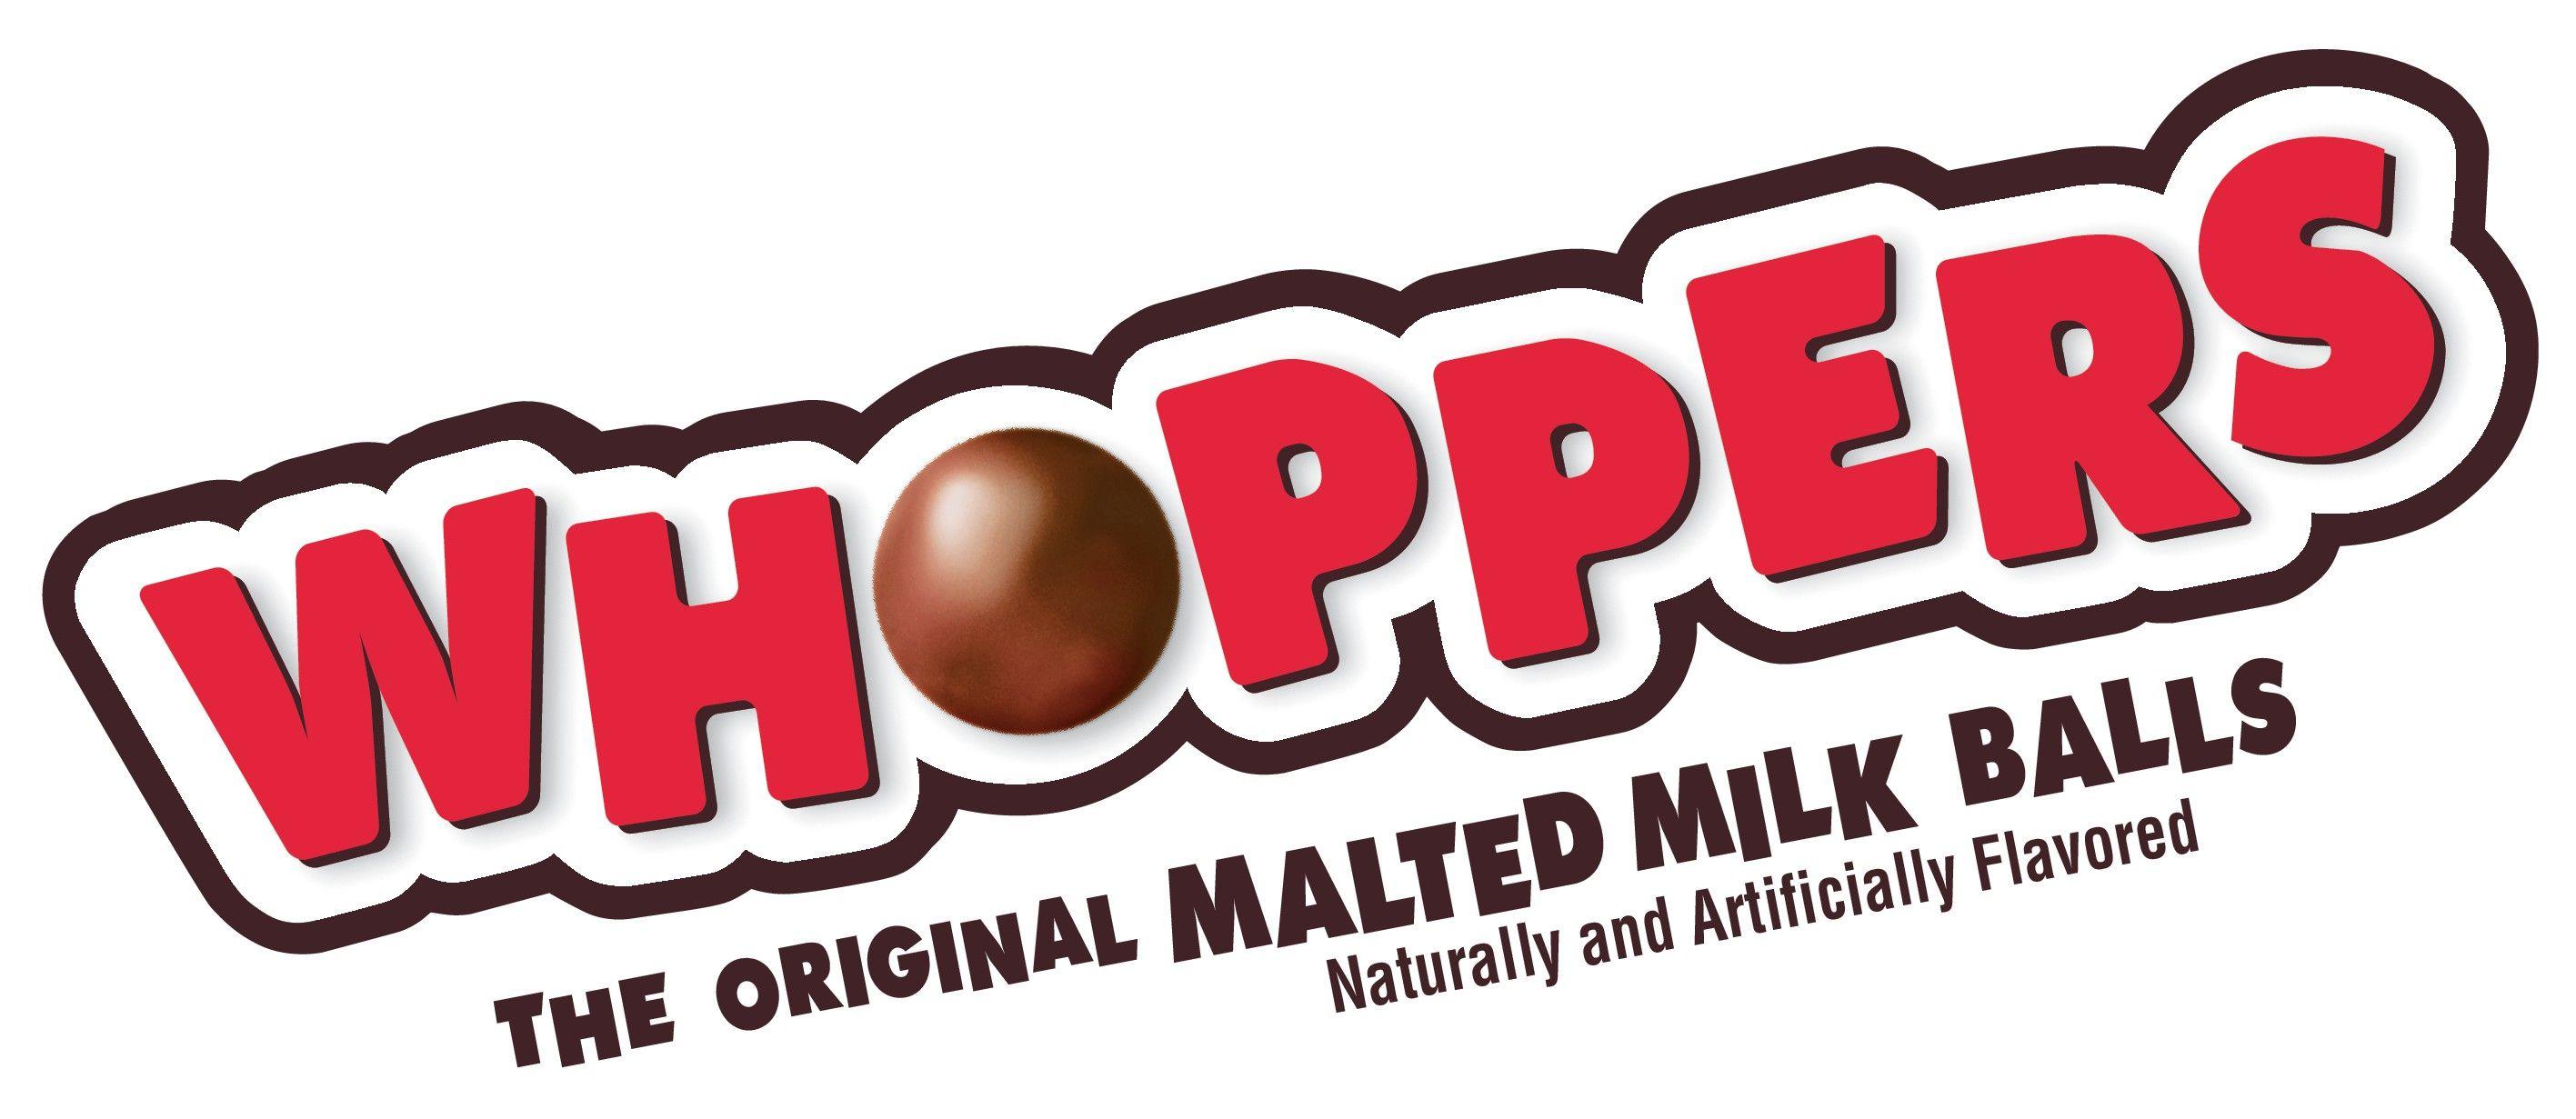 Whoppers Logo - Whoppers Malted Milk Balls | The Original Malted Milk Candy